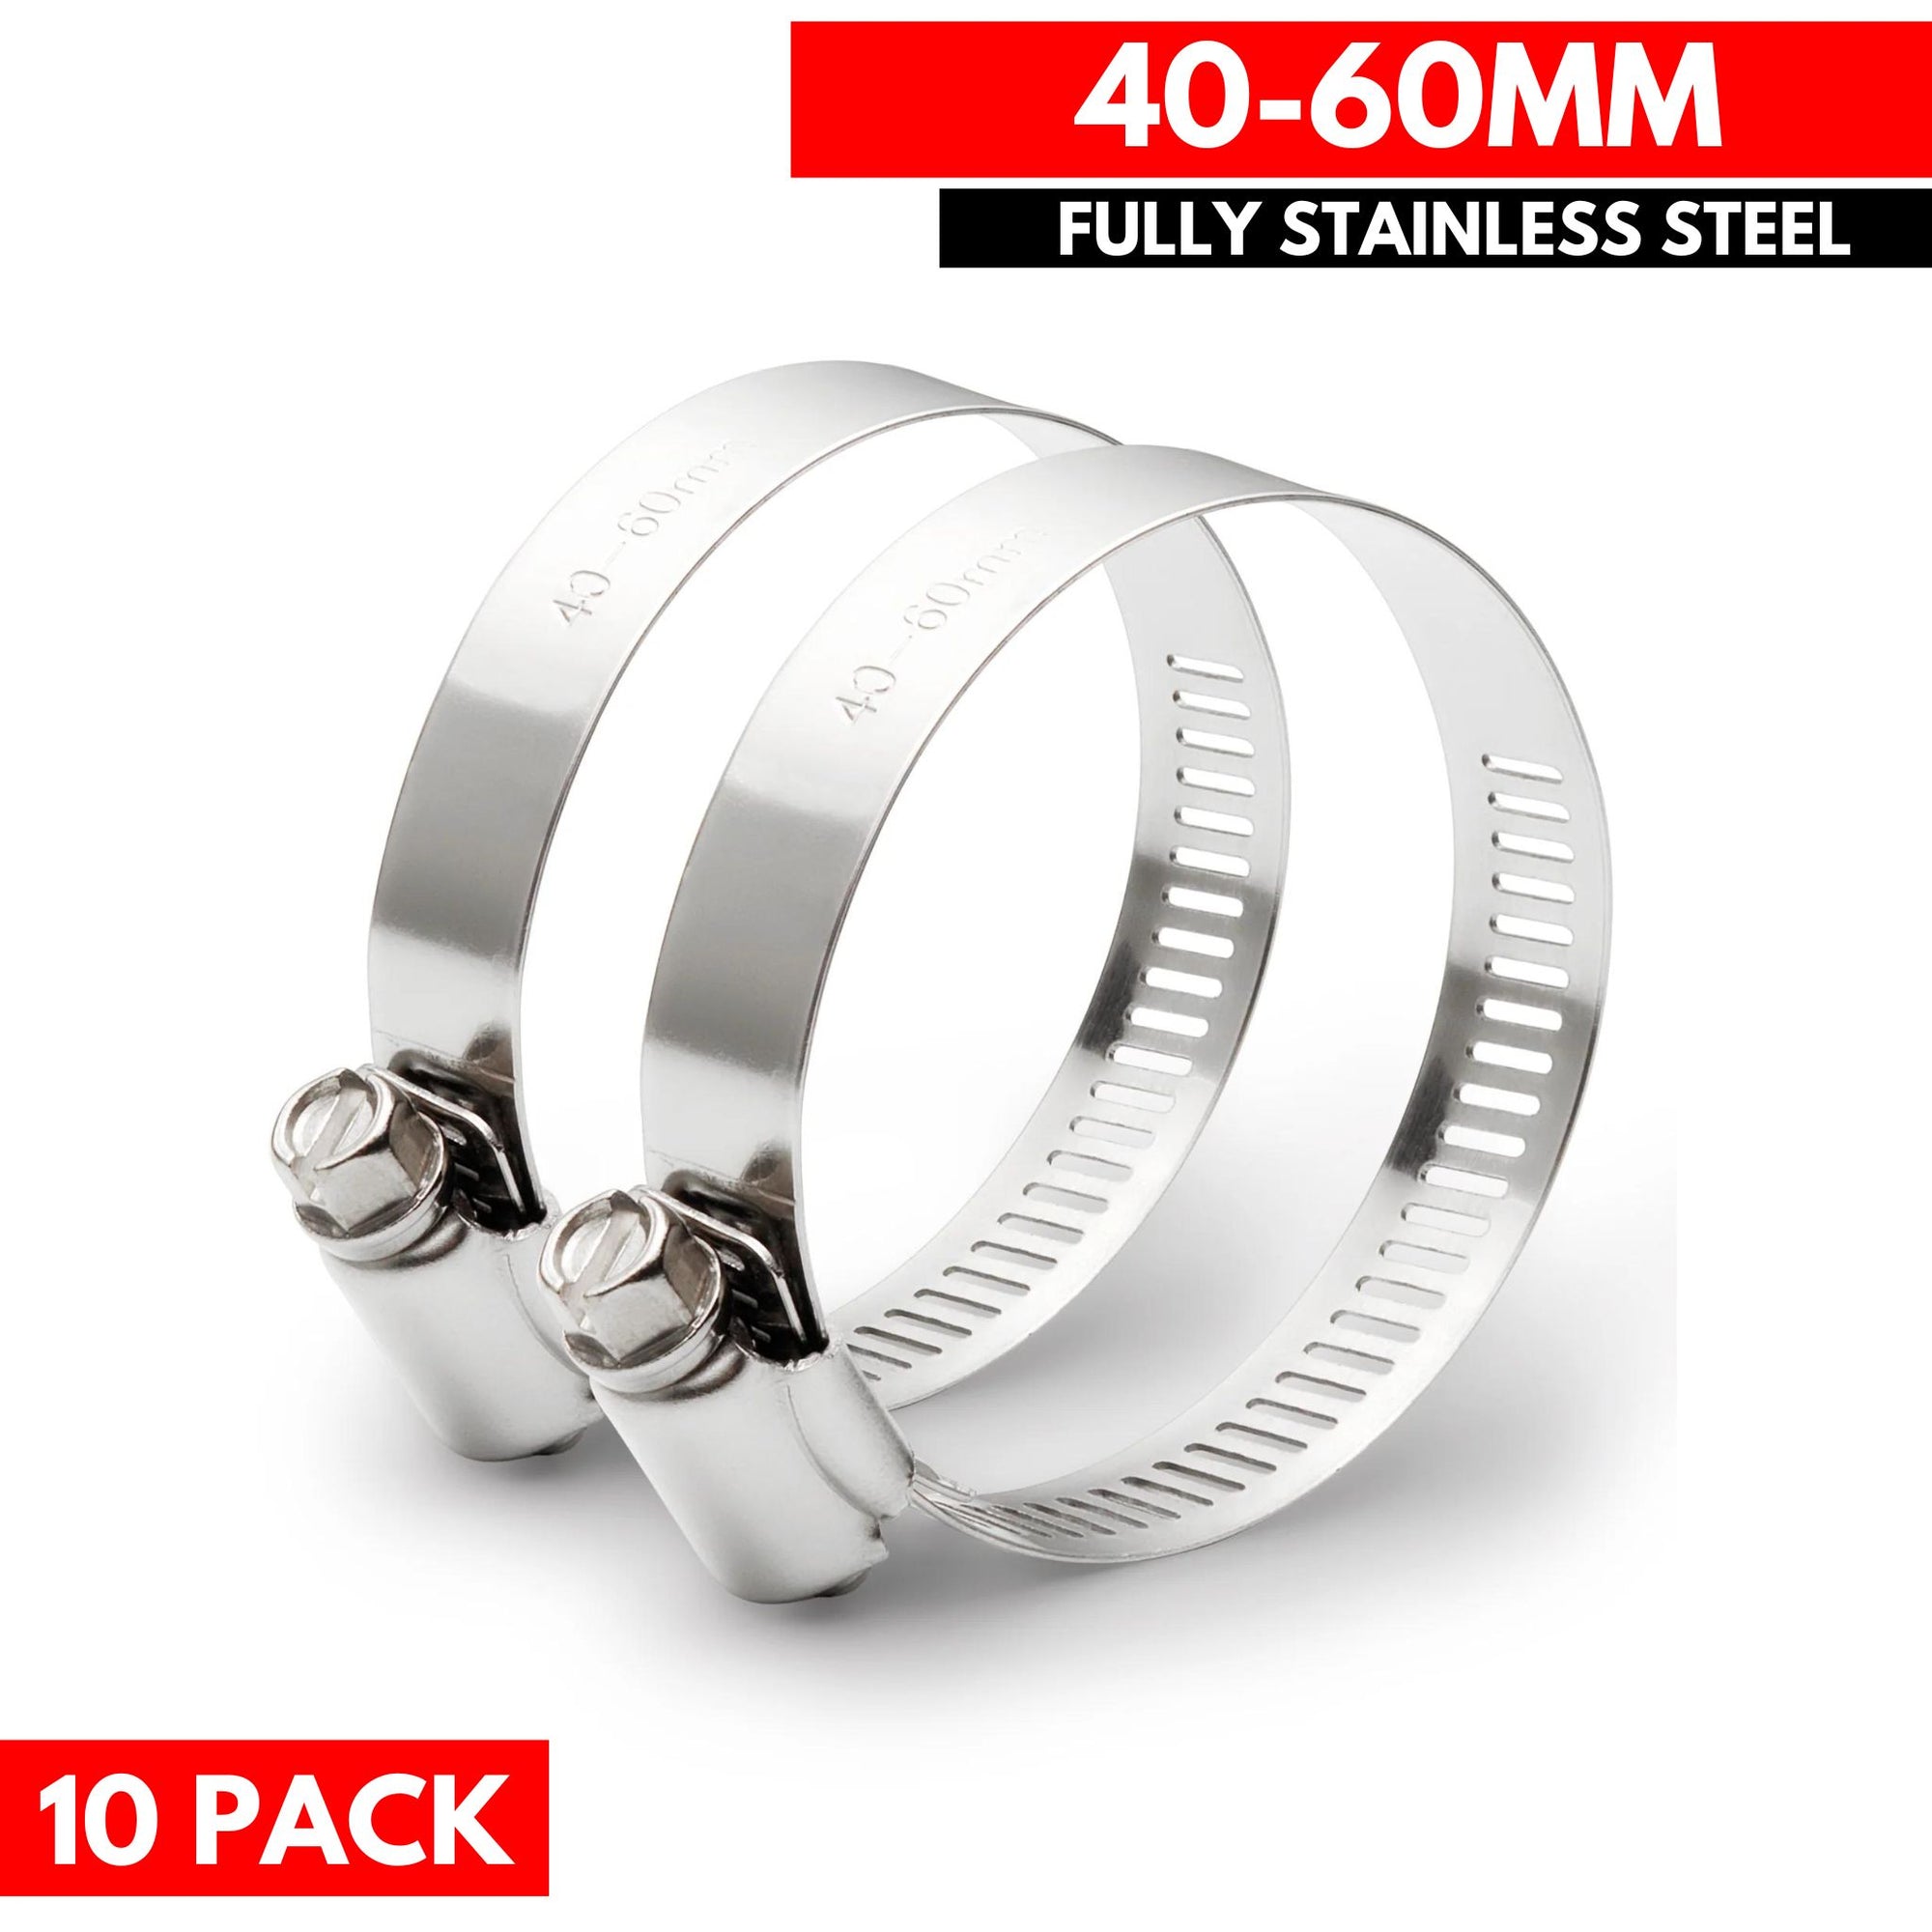 40-60mm - German Type 304 Hose Clamp - Fully Stainless Steel (10 Pieces) - South East Clearance Centre